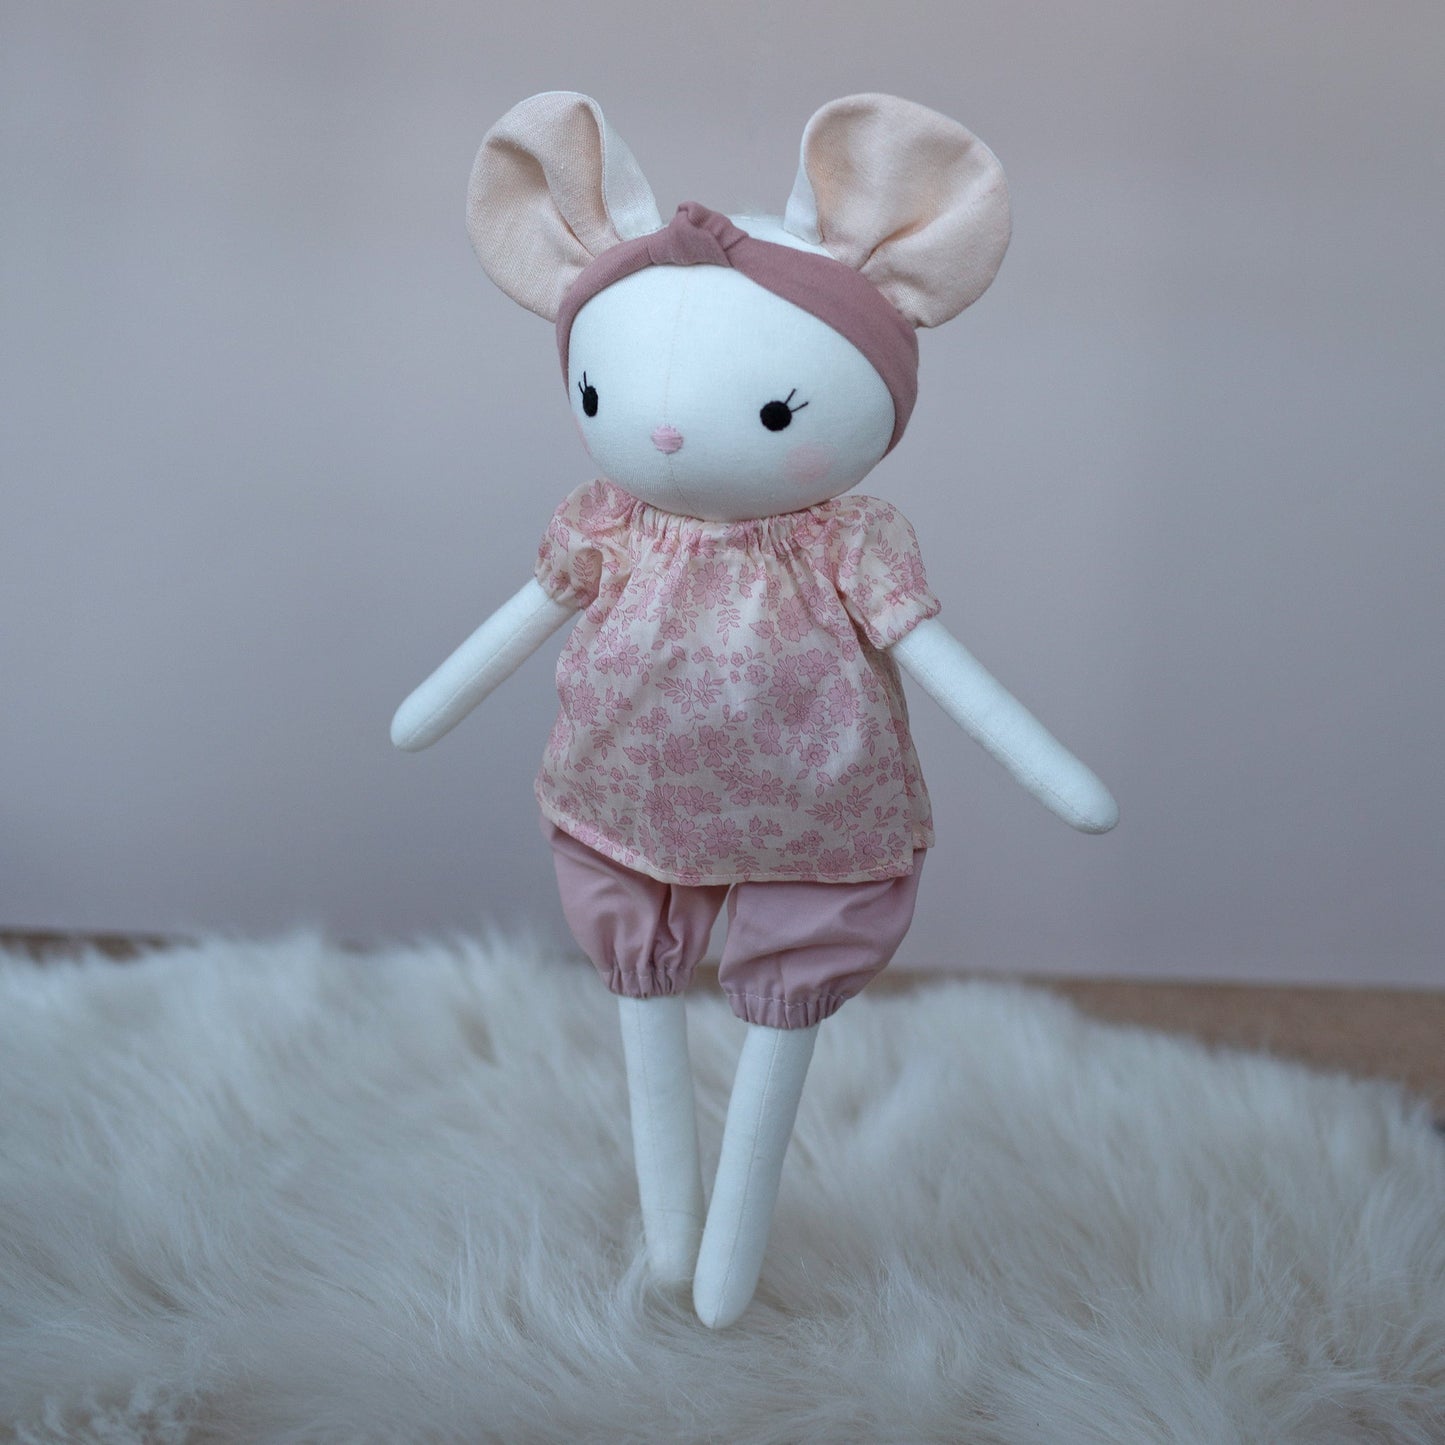 Mouse sewing pattern and tutorial - Studio Seren